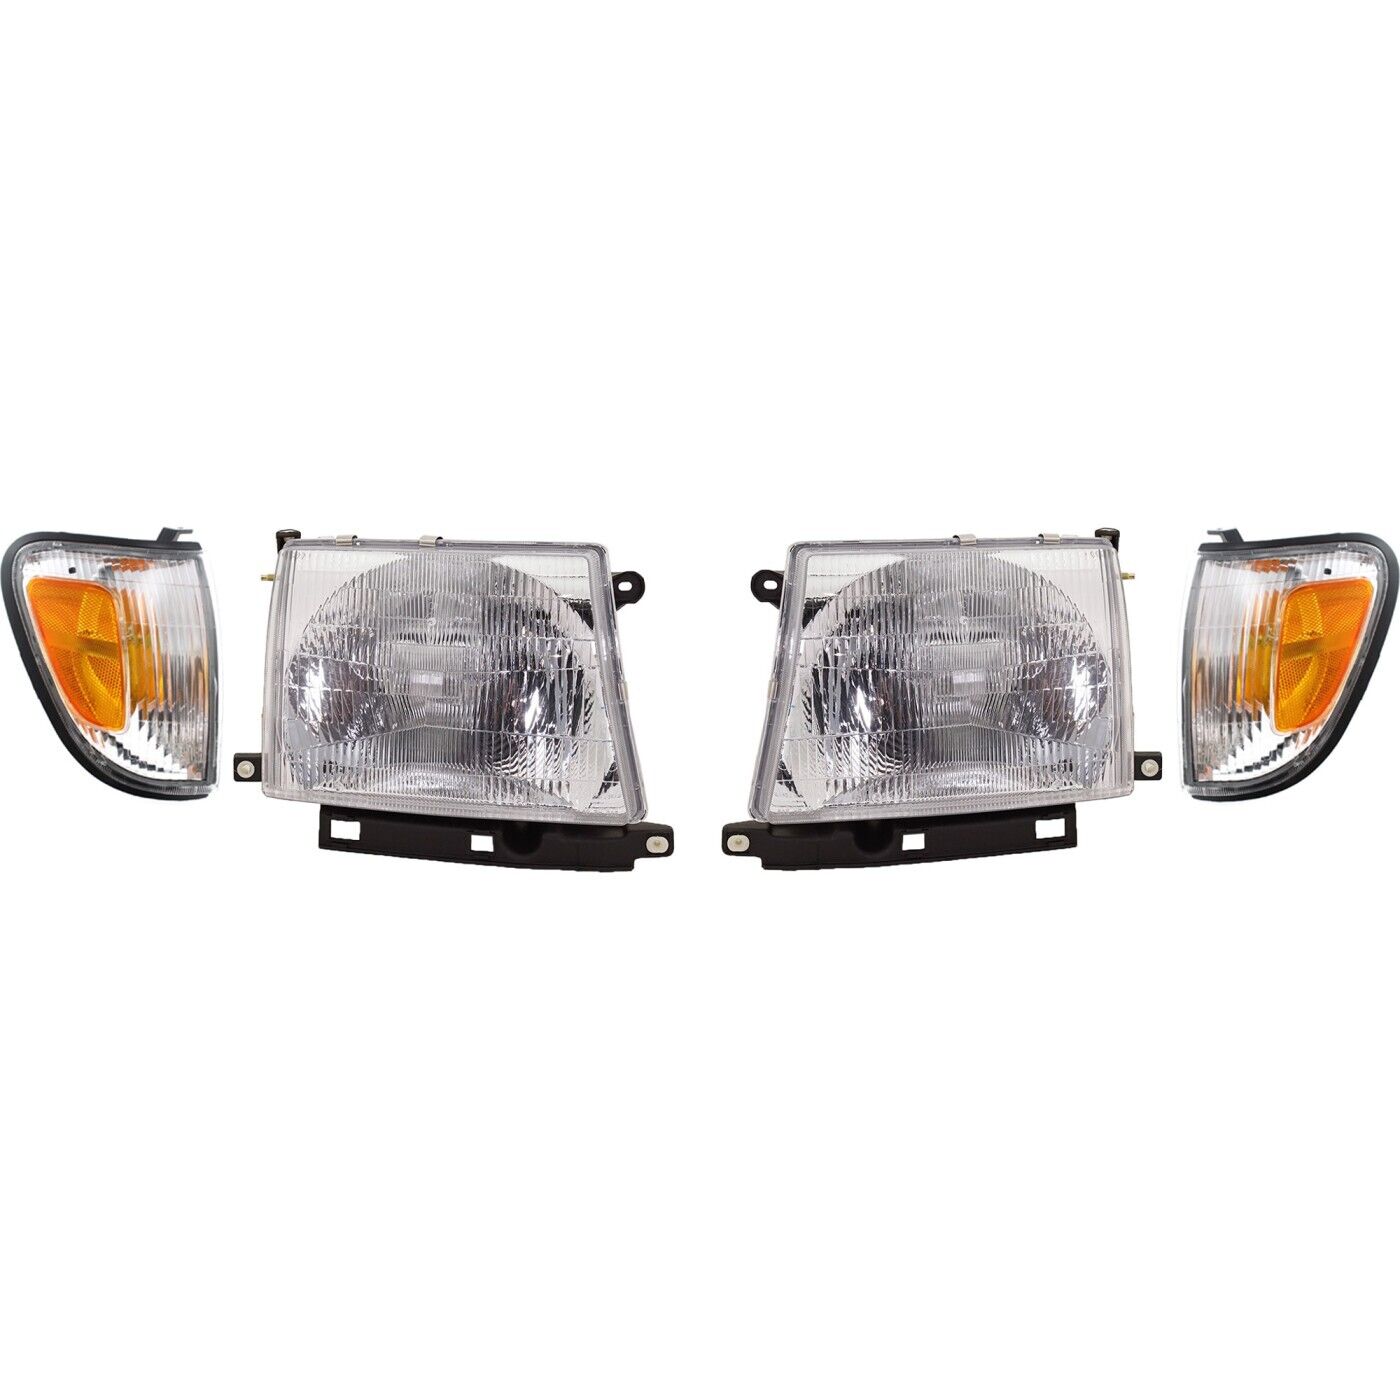 Headlight Kit For 1997-2000 Toyota Tacoma 4WD RWD With Corner Light LH and RH